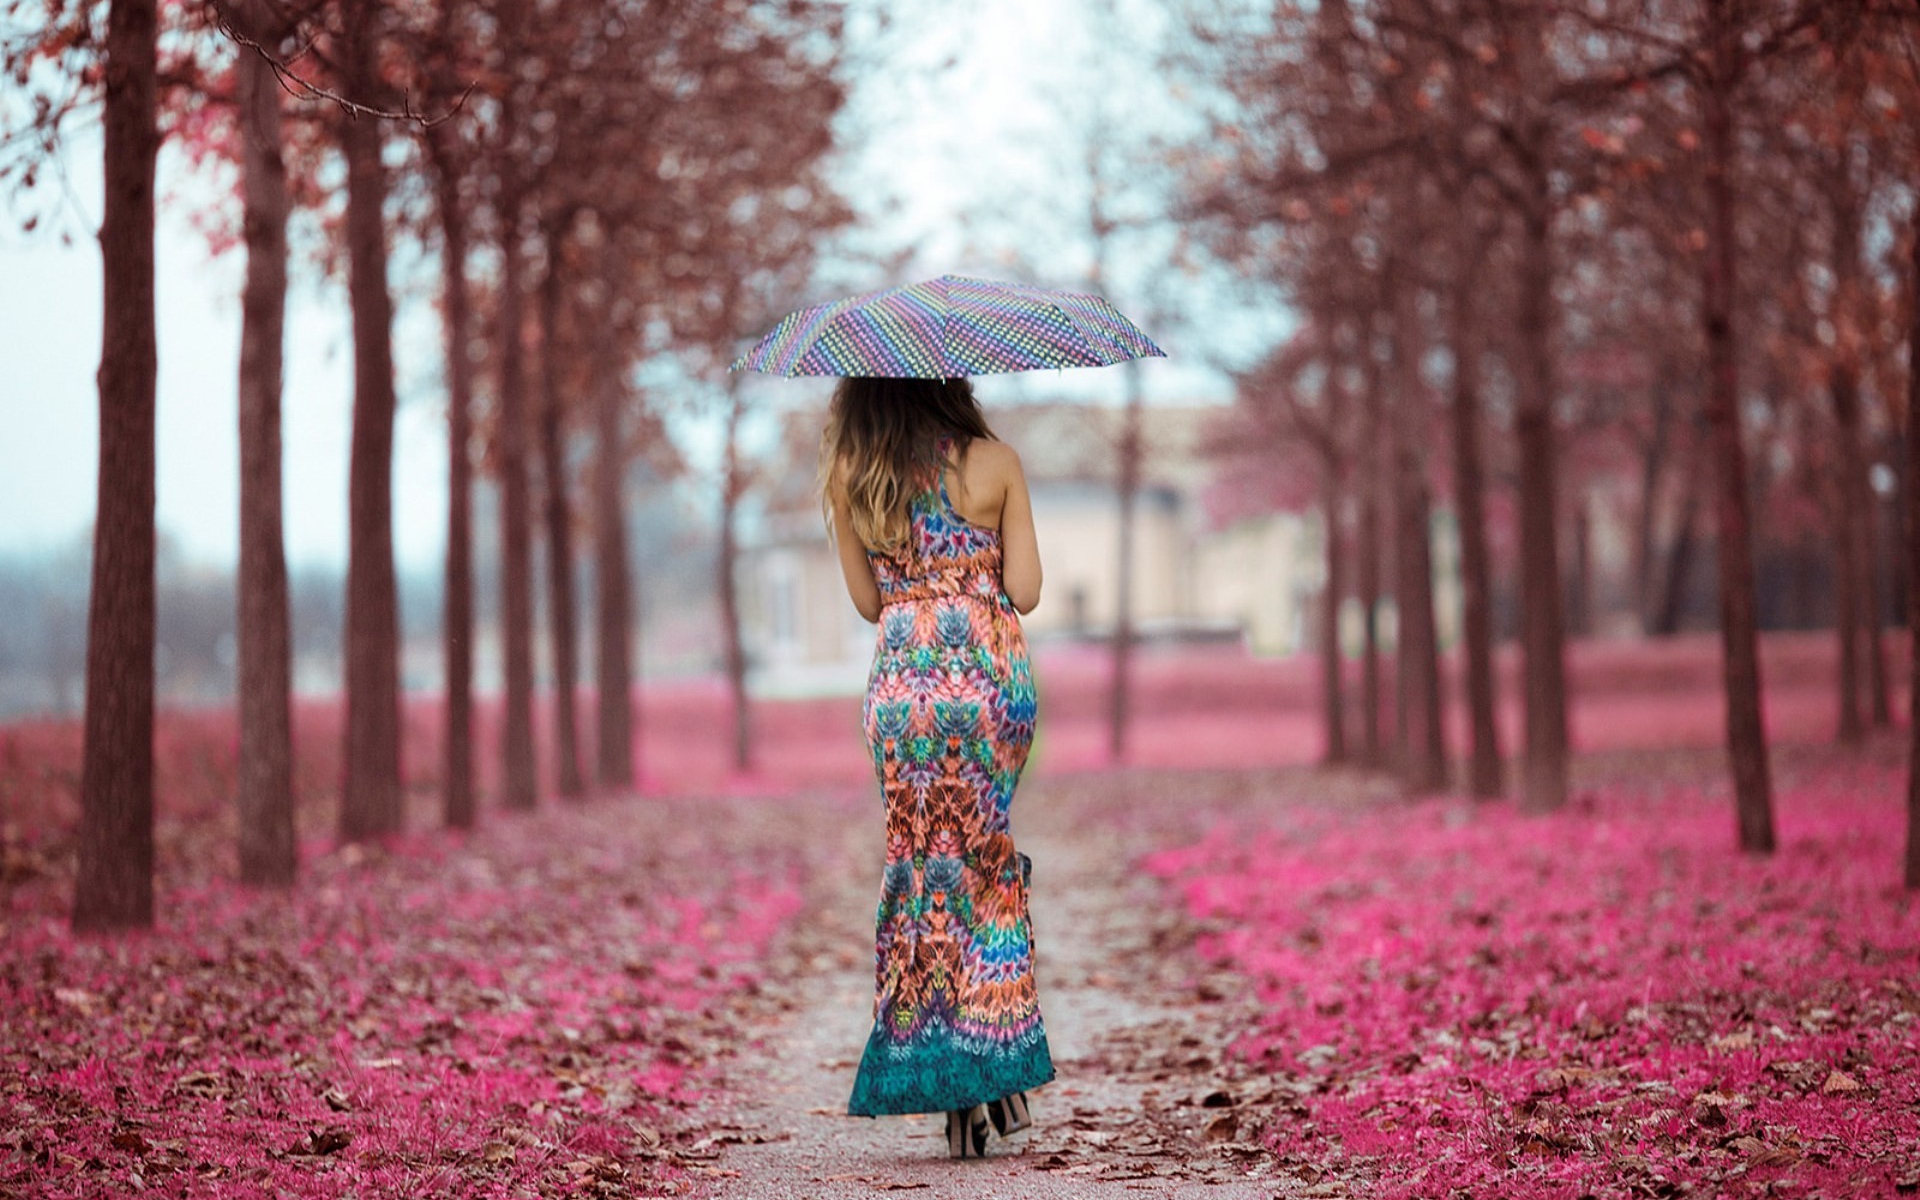 The girl under an umbrella in a beautiful dress goes through the alley